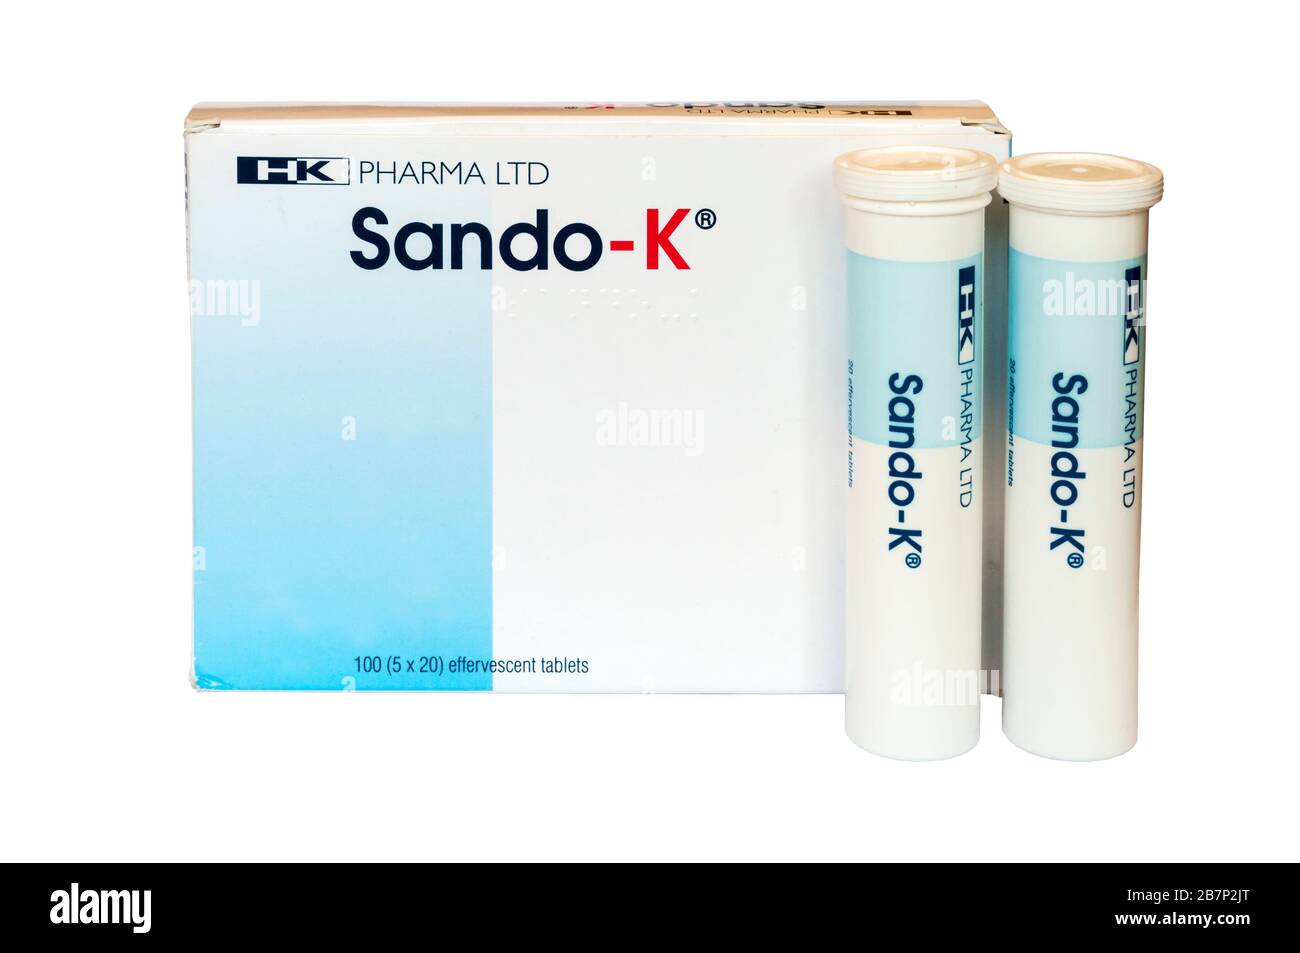 Box and tubes of Sando-K effervescent tablets taken to treat low potassium levels. Stock Photo